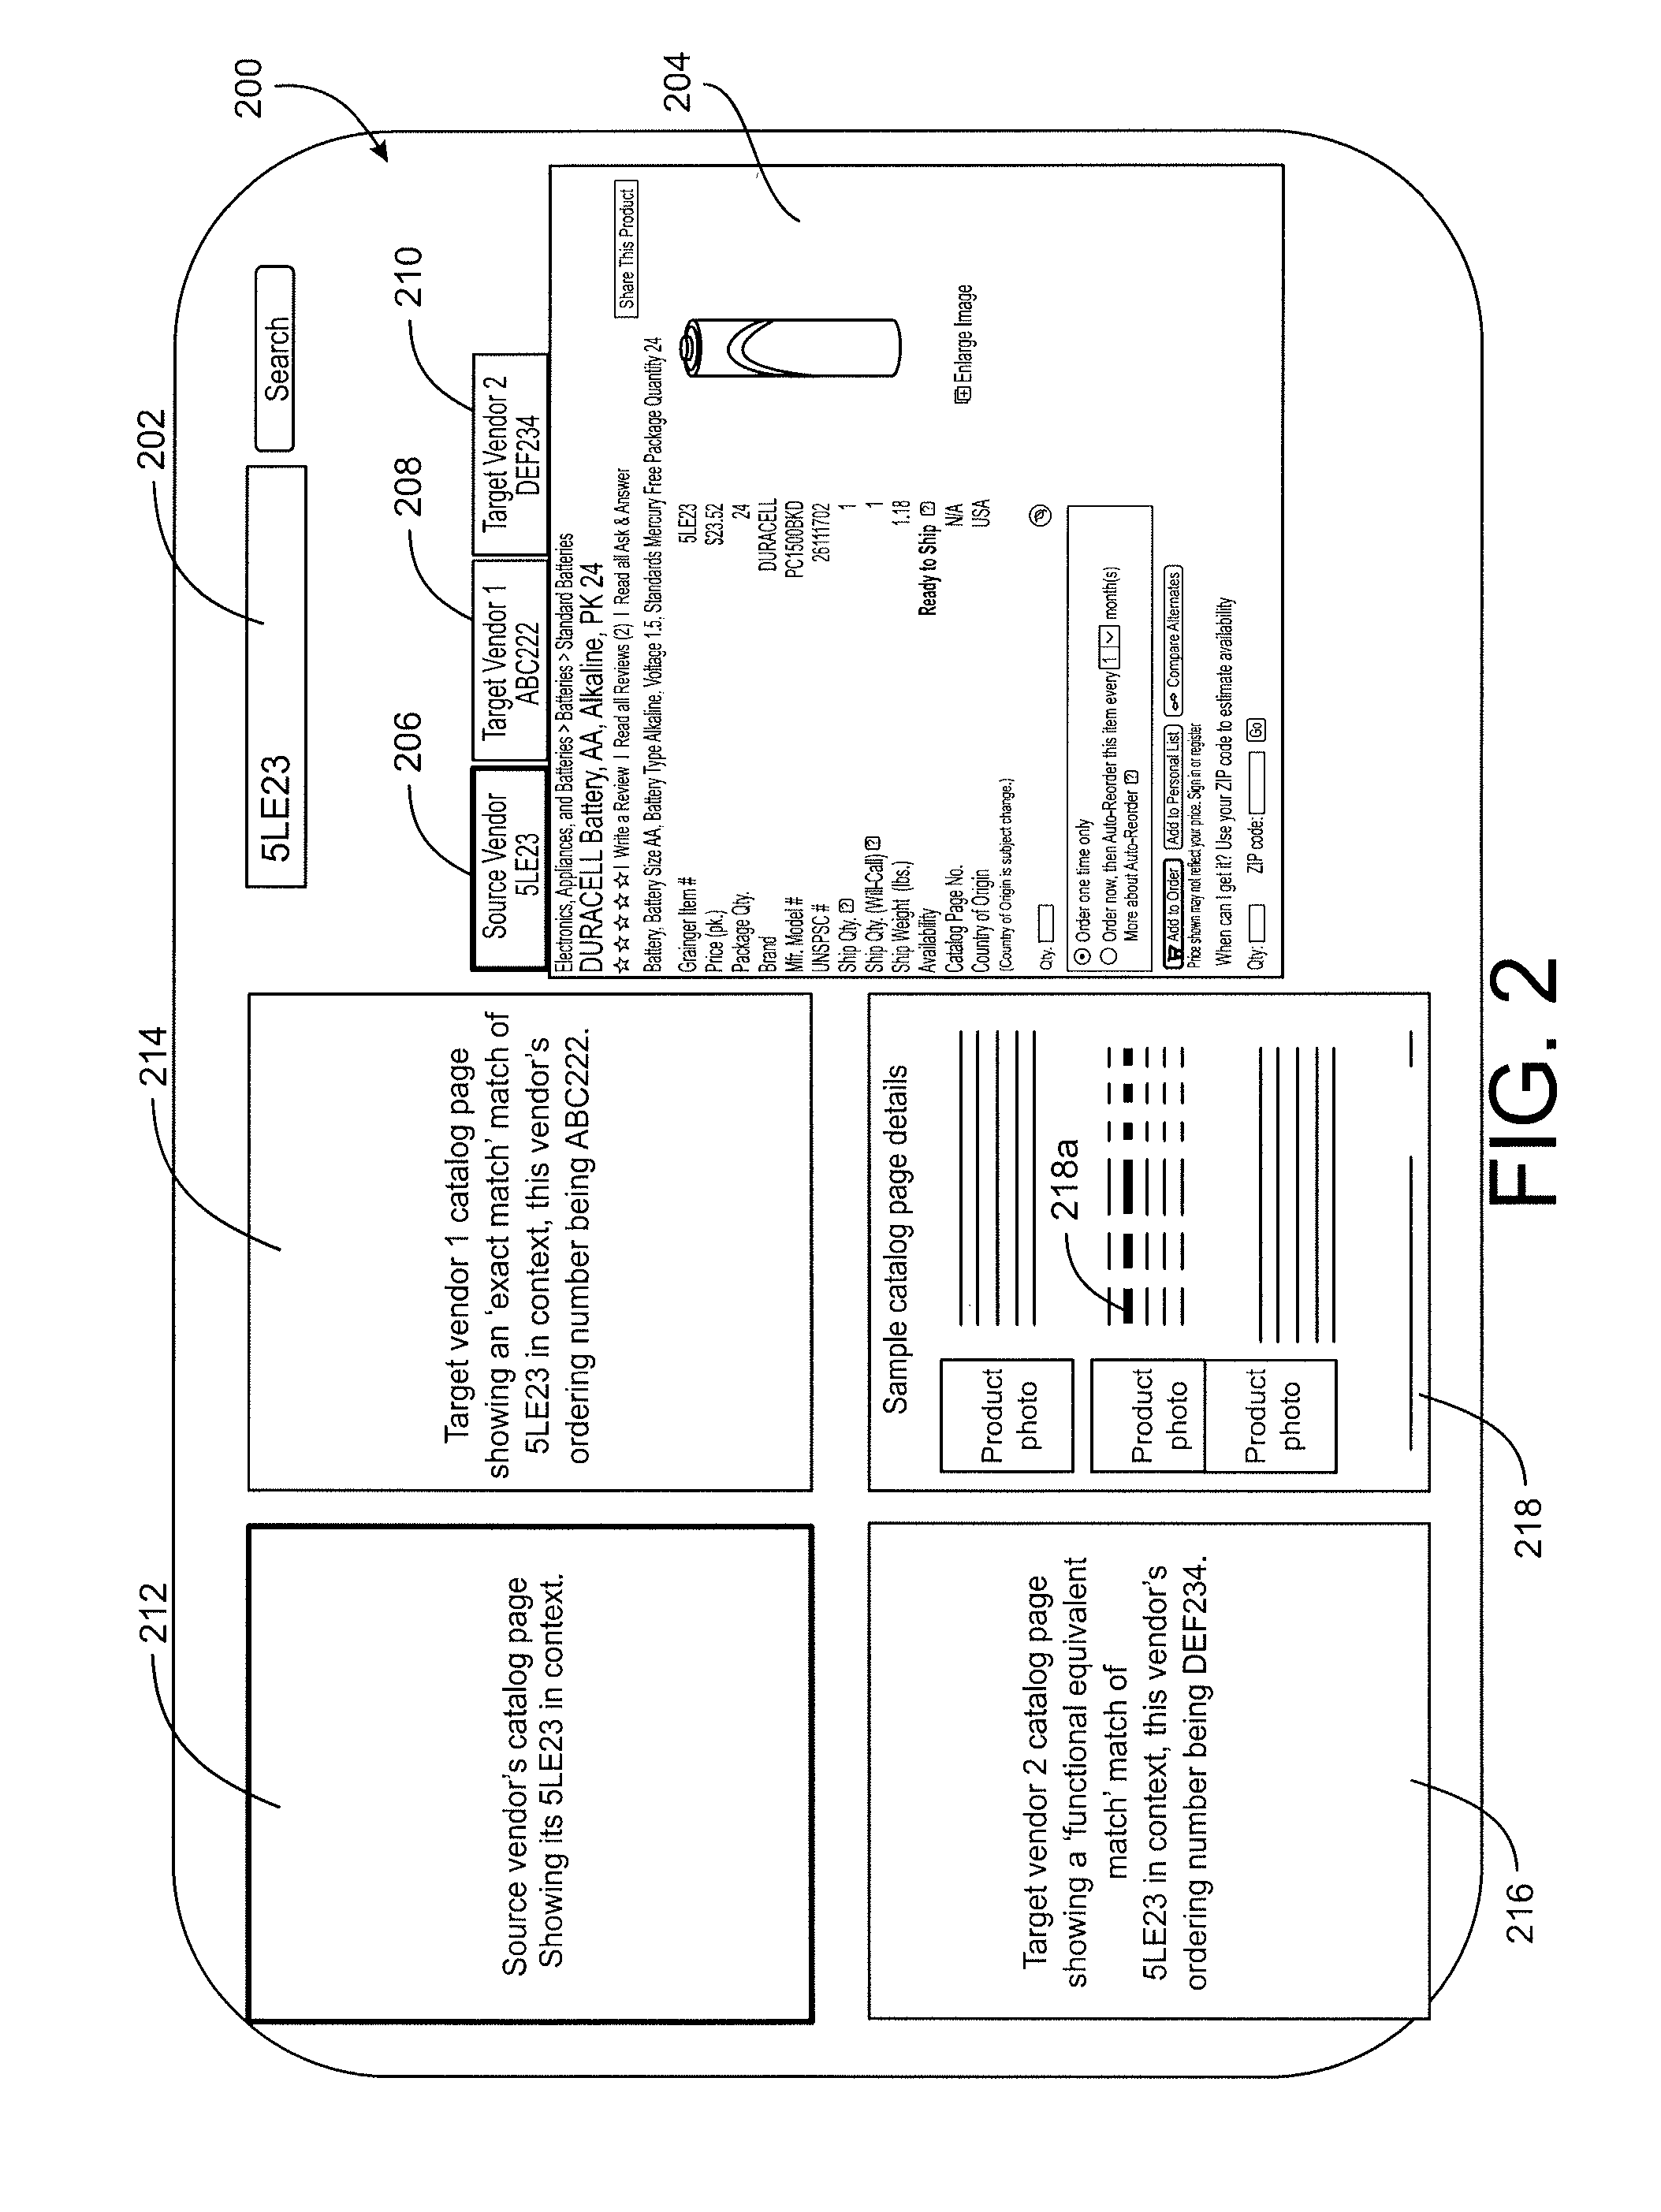 Systems and methods for providing third party product cross referencing